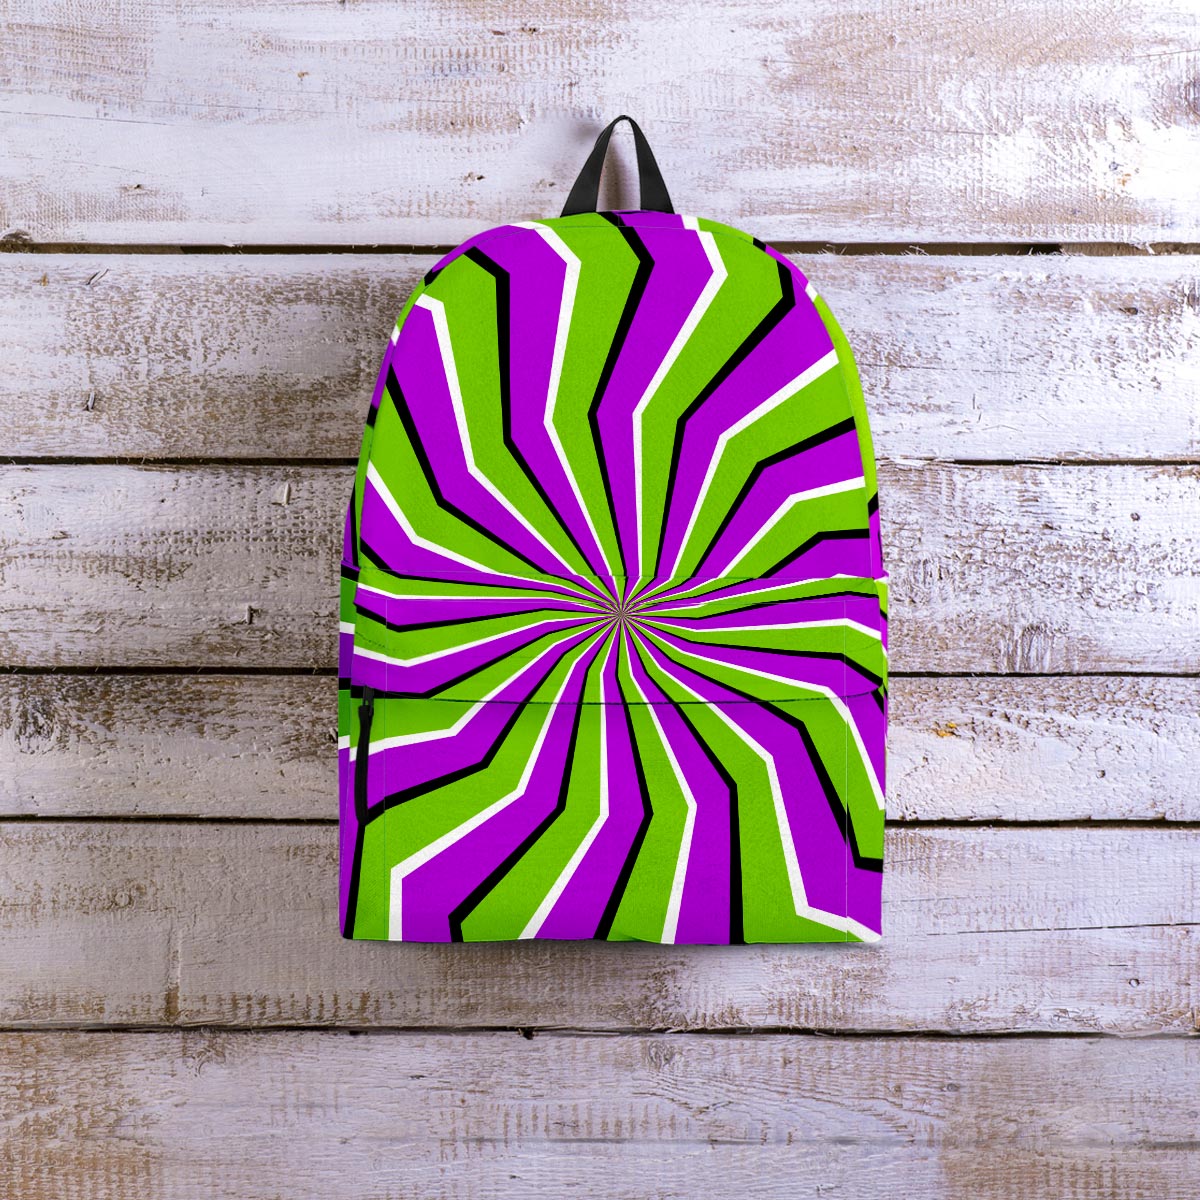 Zigzag Optical illusion Backpack-grizzshop